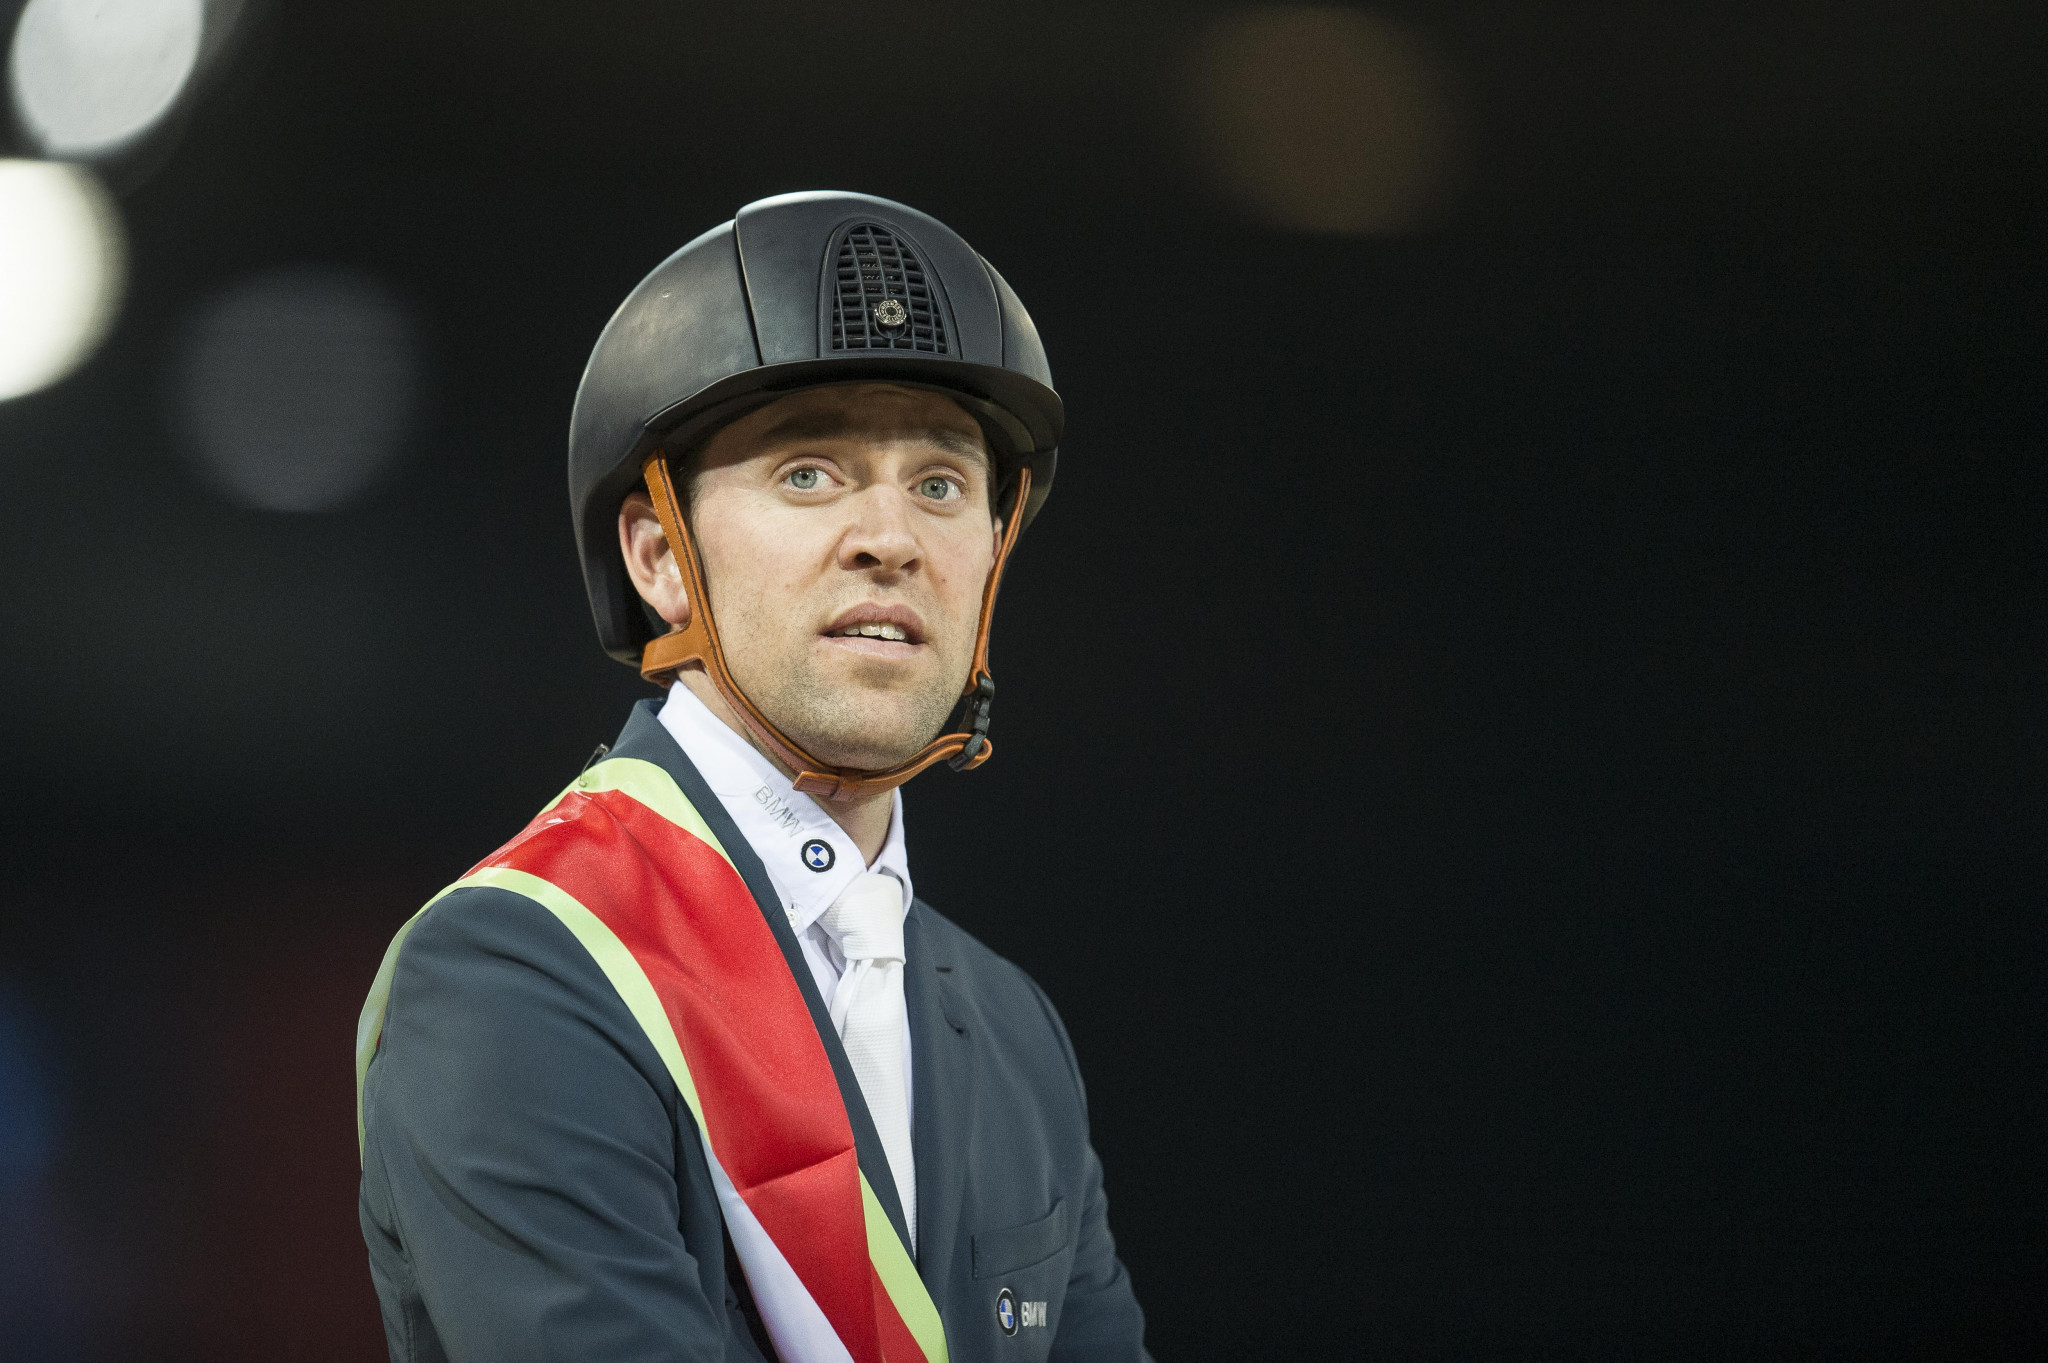 Delestre rides Hermes Ryan to victory at Longines FEI World Cup in Lyon